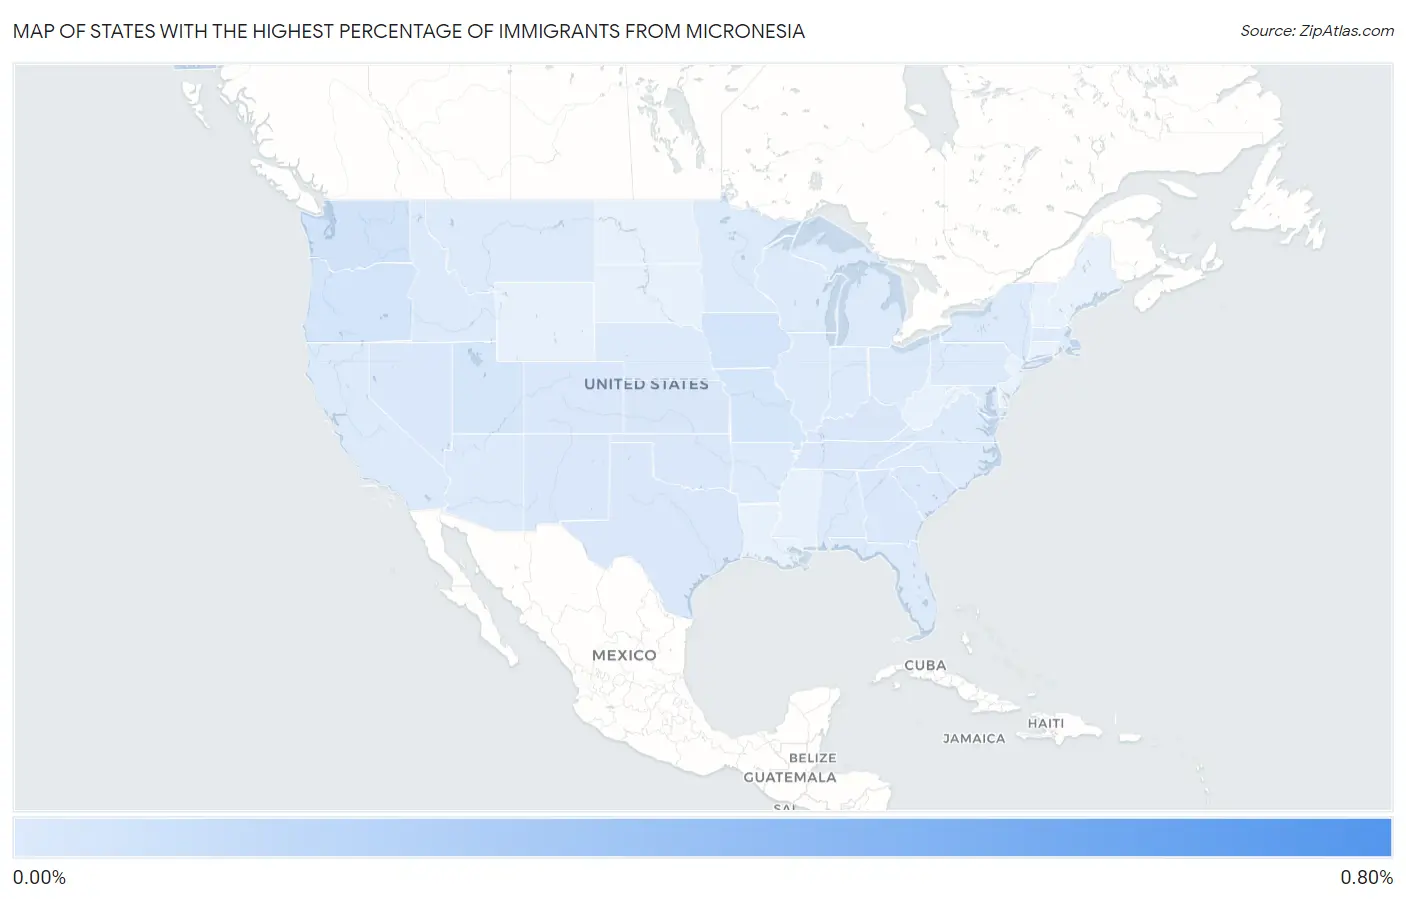 States with the Highest Percentage of Immigrants from Micronesia in the United States Map